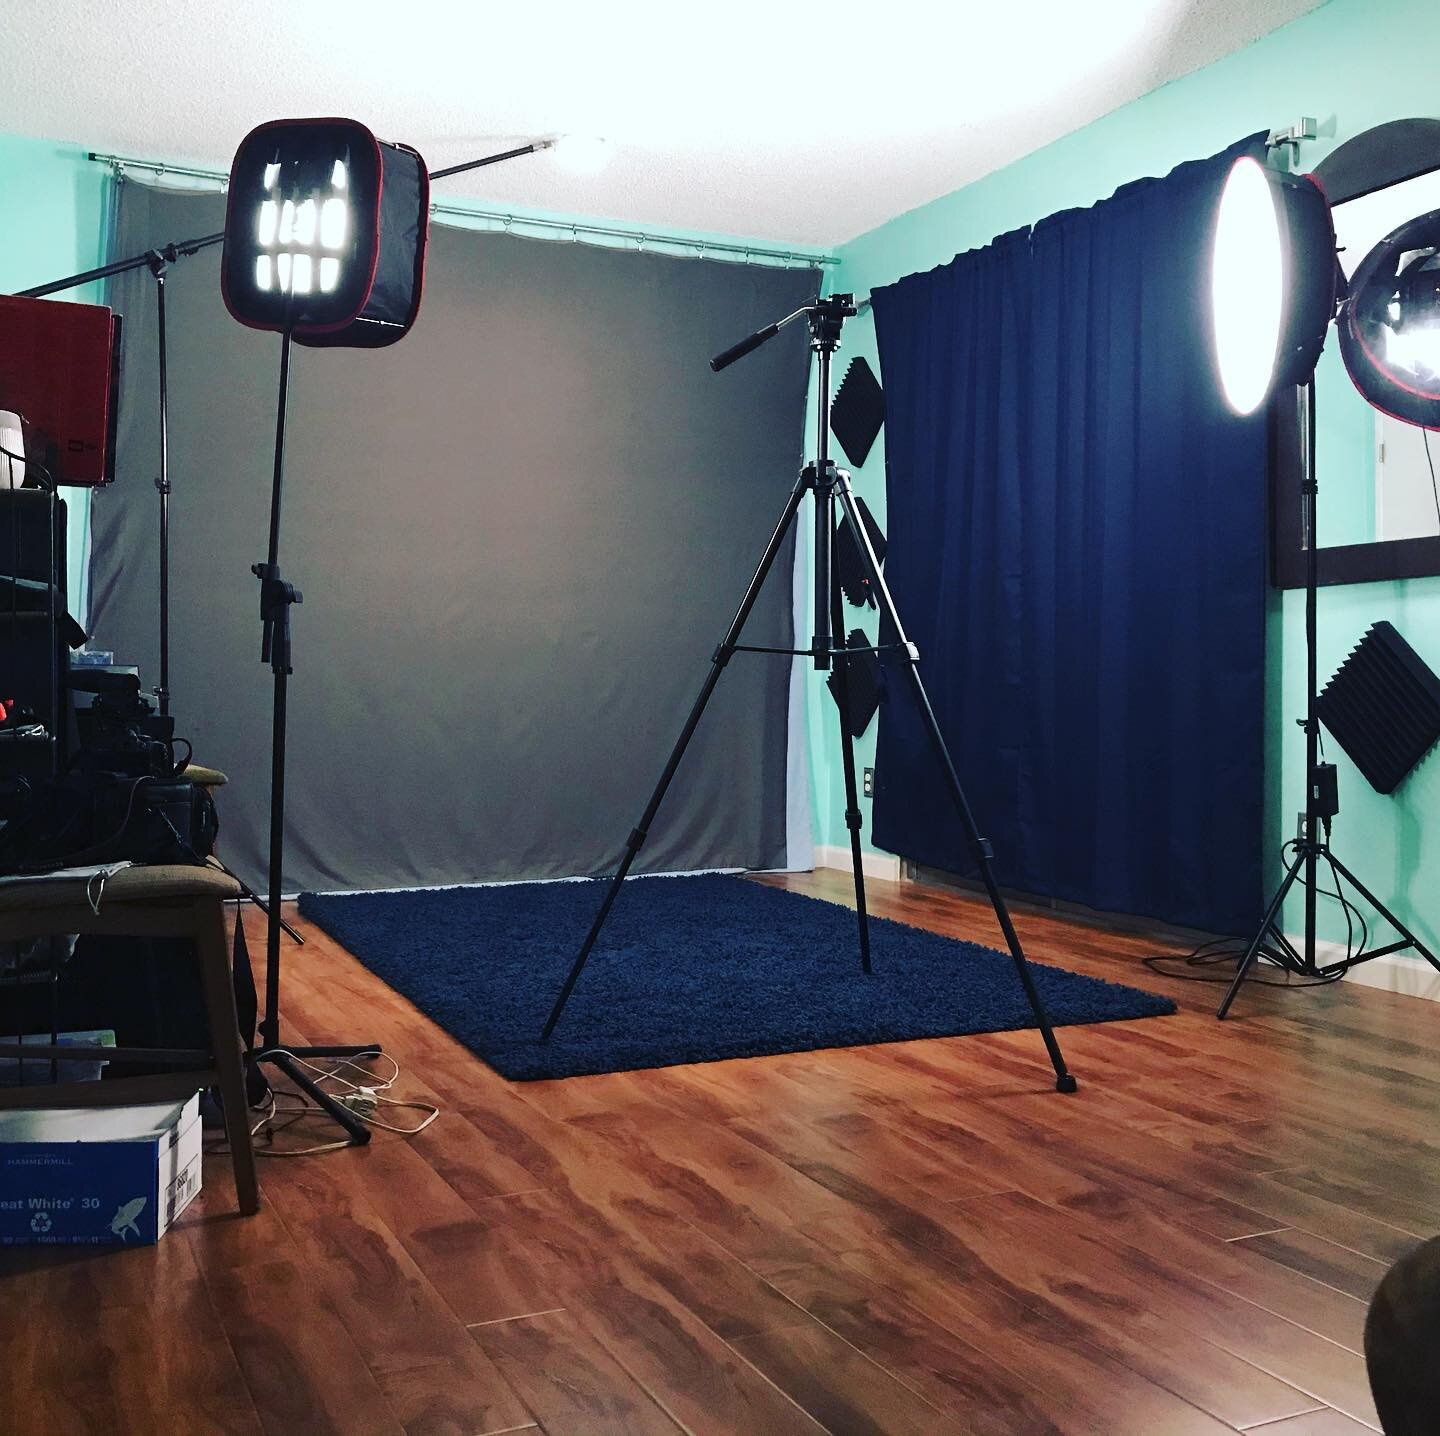 Back to that selftape audition grind. Very grateful and feeling lucky that can get an audition my first week in LA. I can&rsquo;t believe I waited so long to move out here!  I have to thank @tannermedding for being my reader and @midnightcitystudiosl